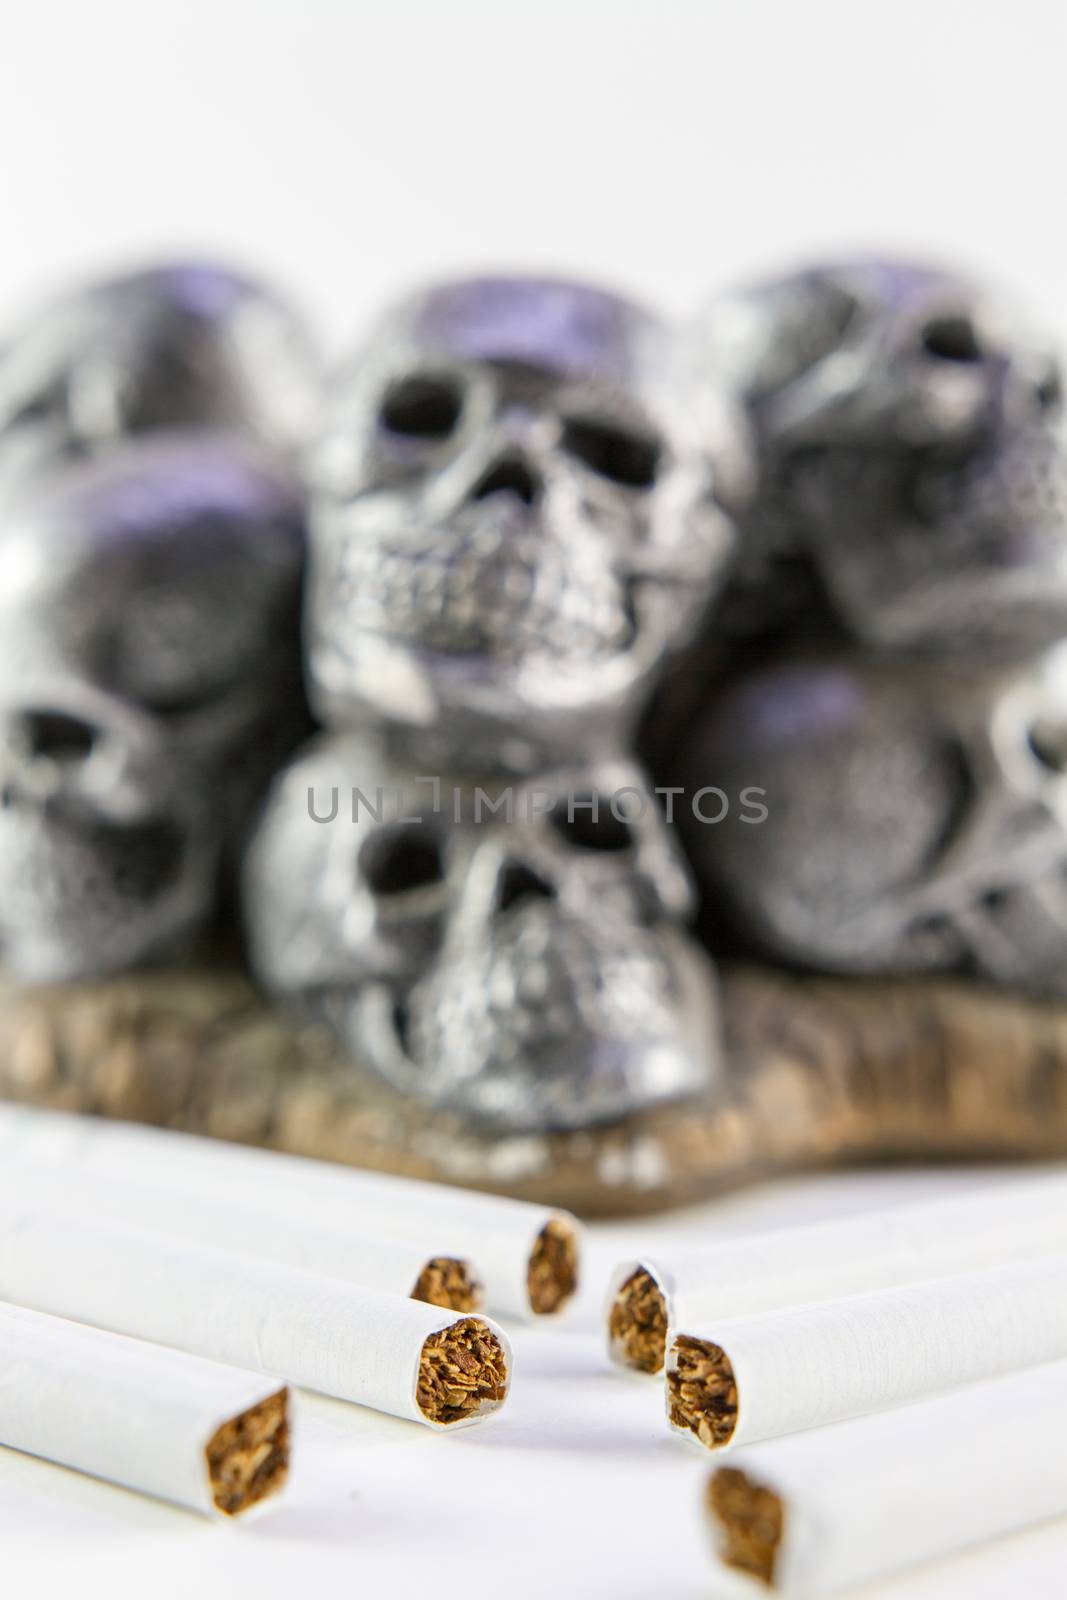 Anti smoking concept with cigarettes and skull by ronnarong